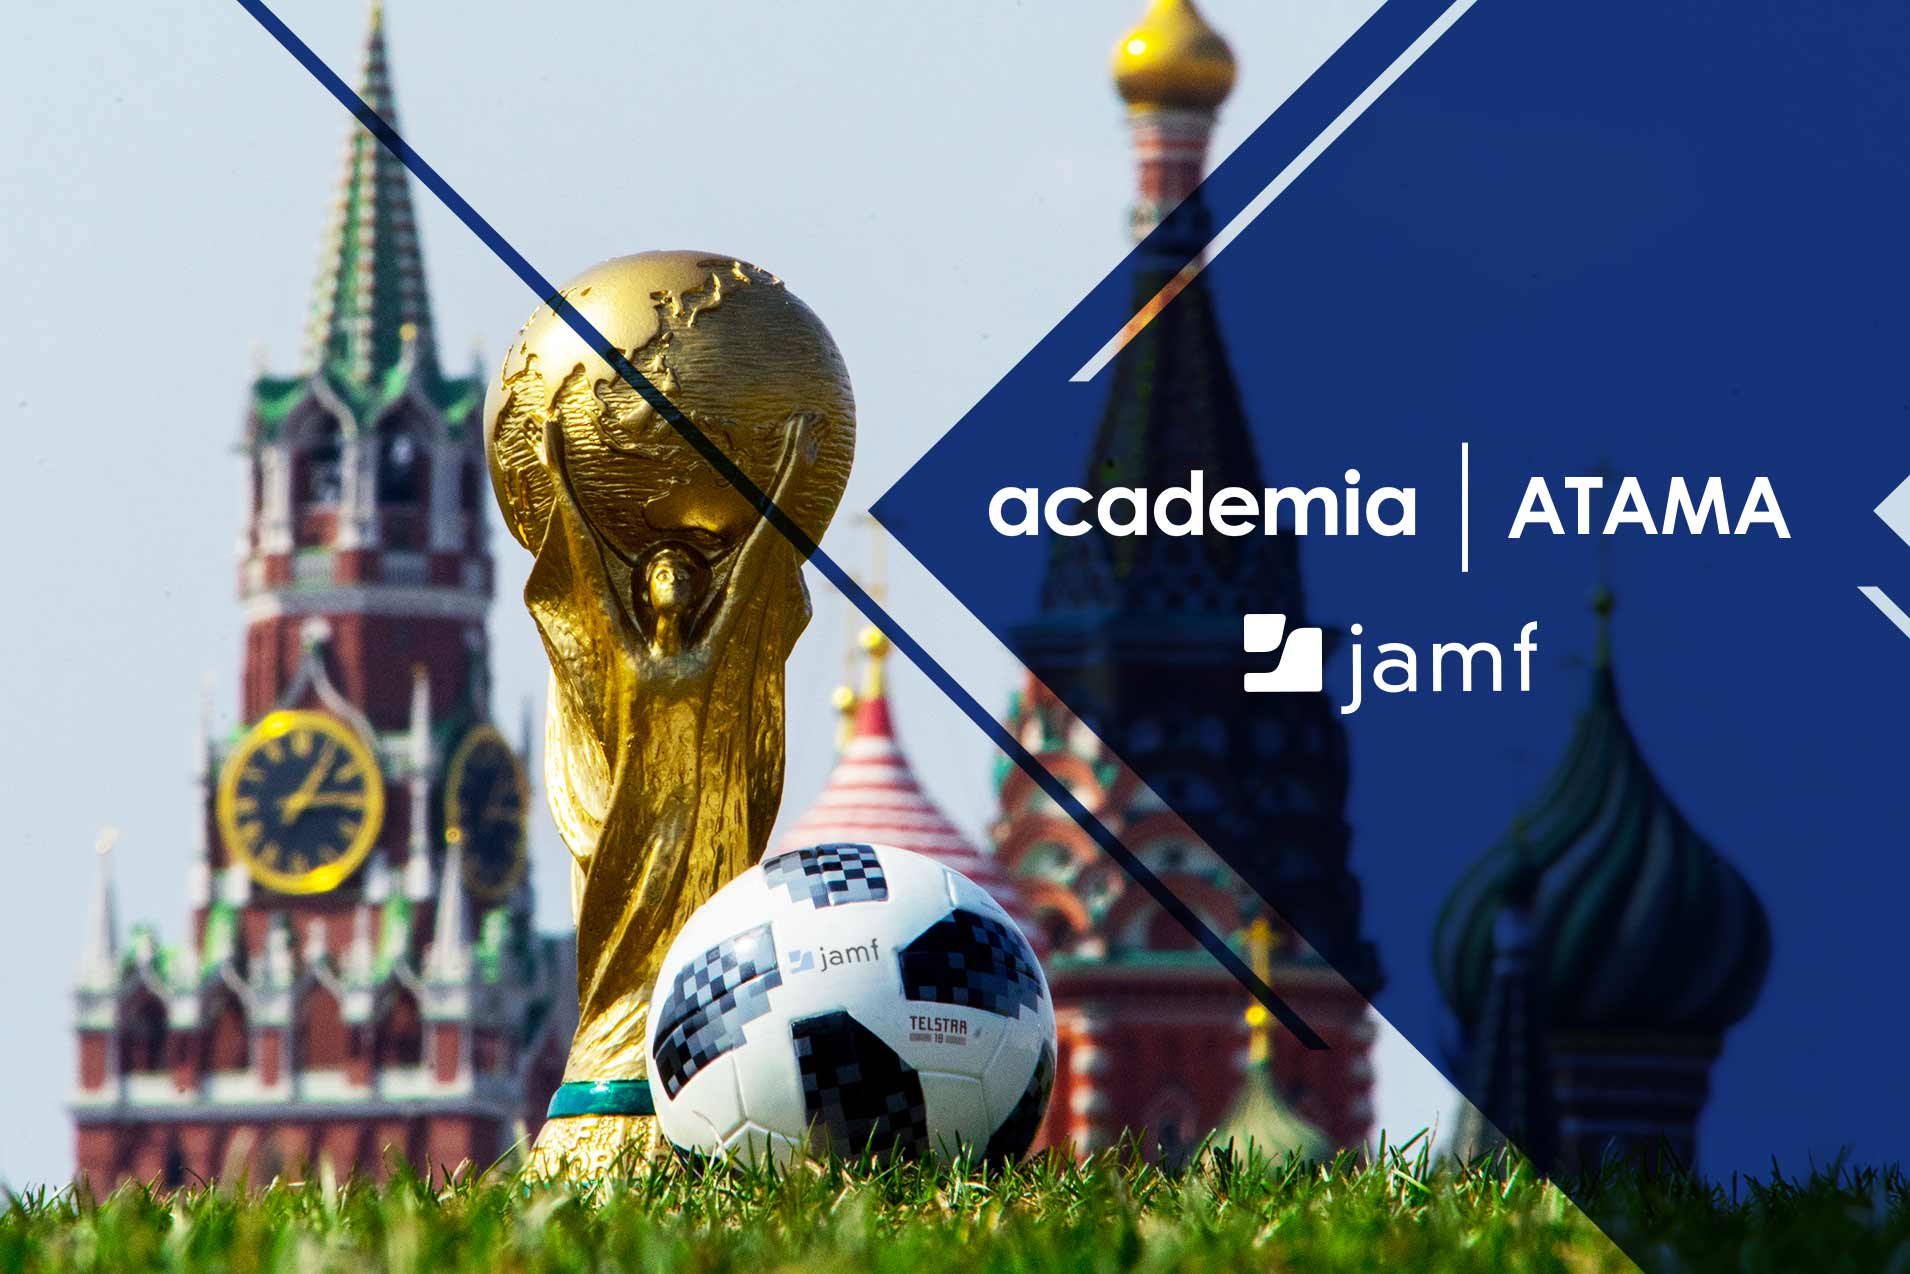 Watch England in the World Cup with ACADEMIA and Jamf